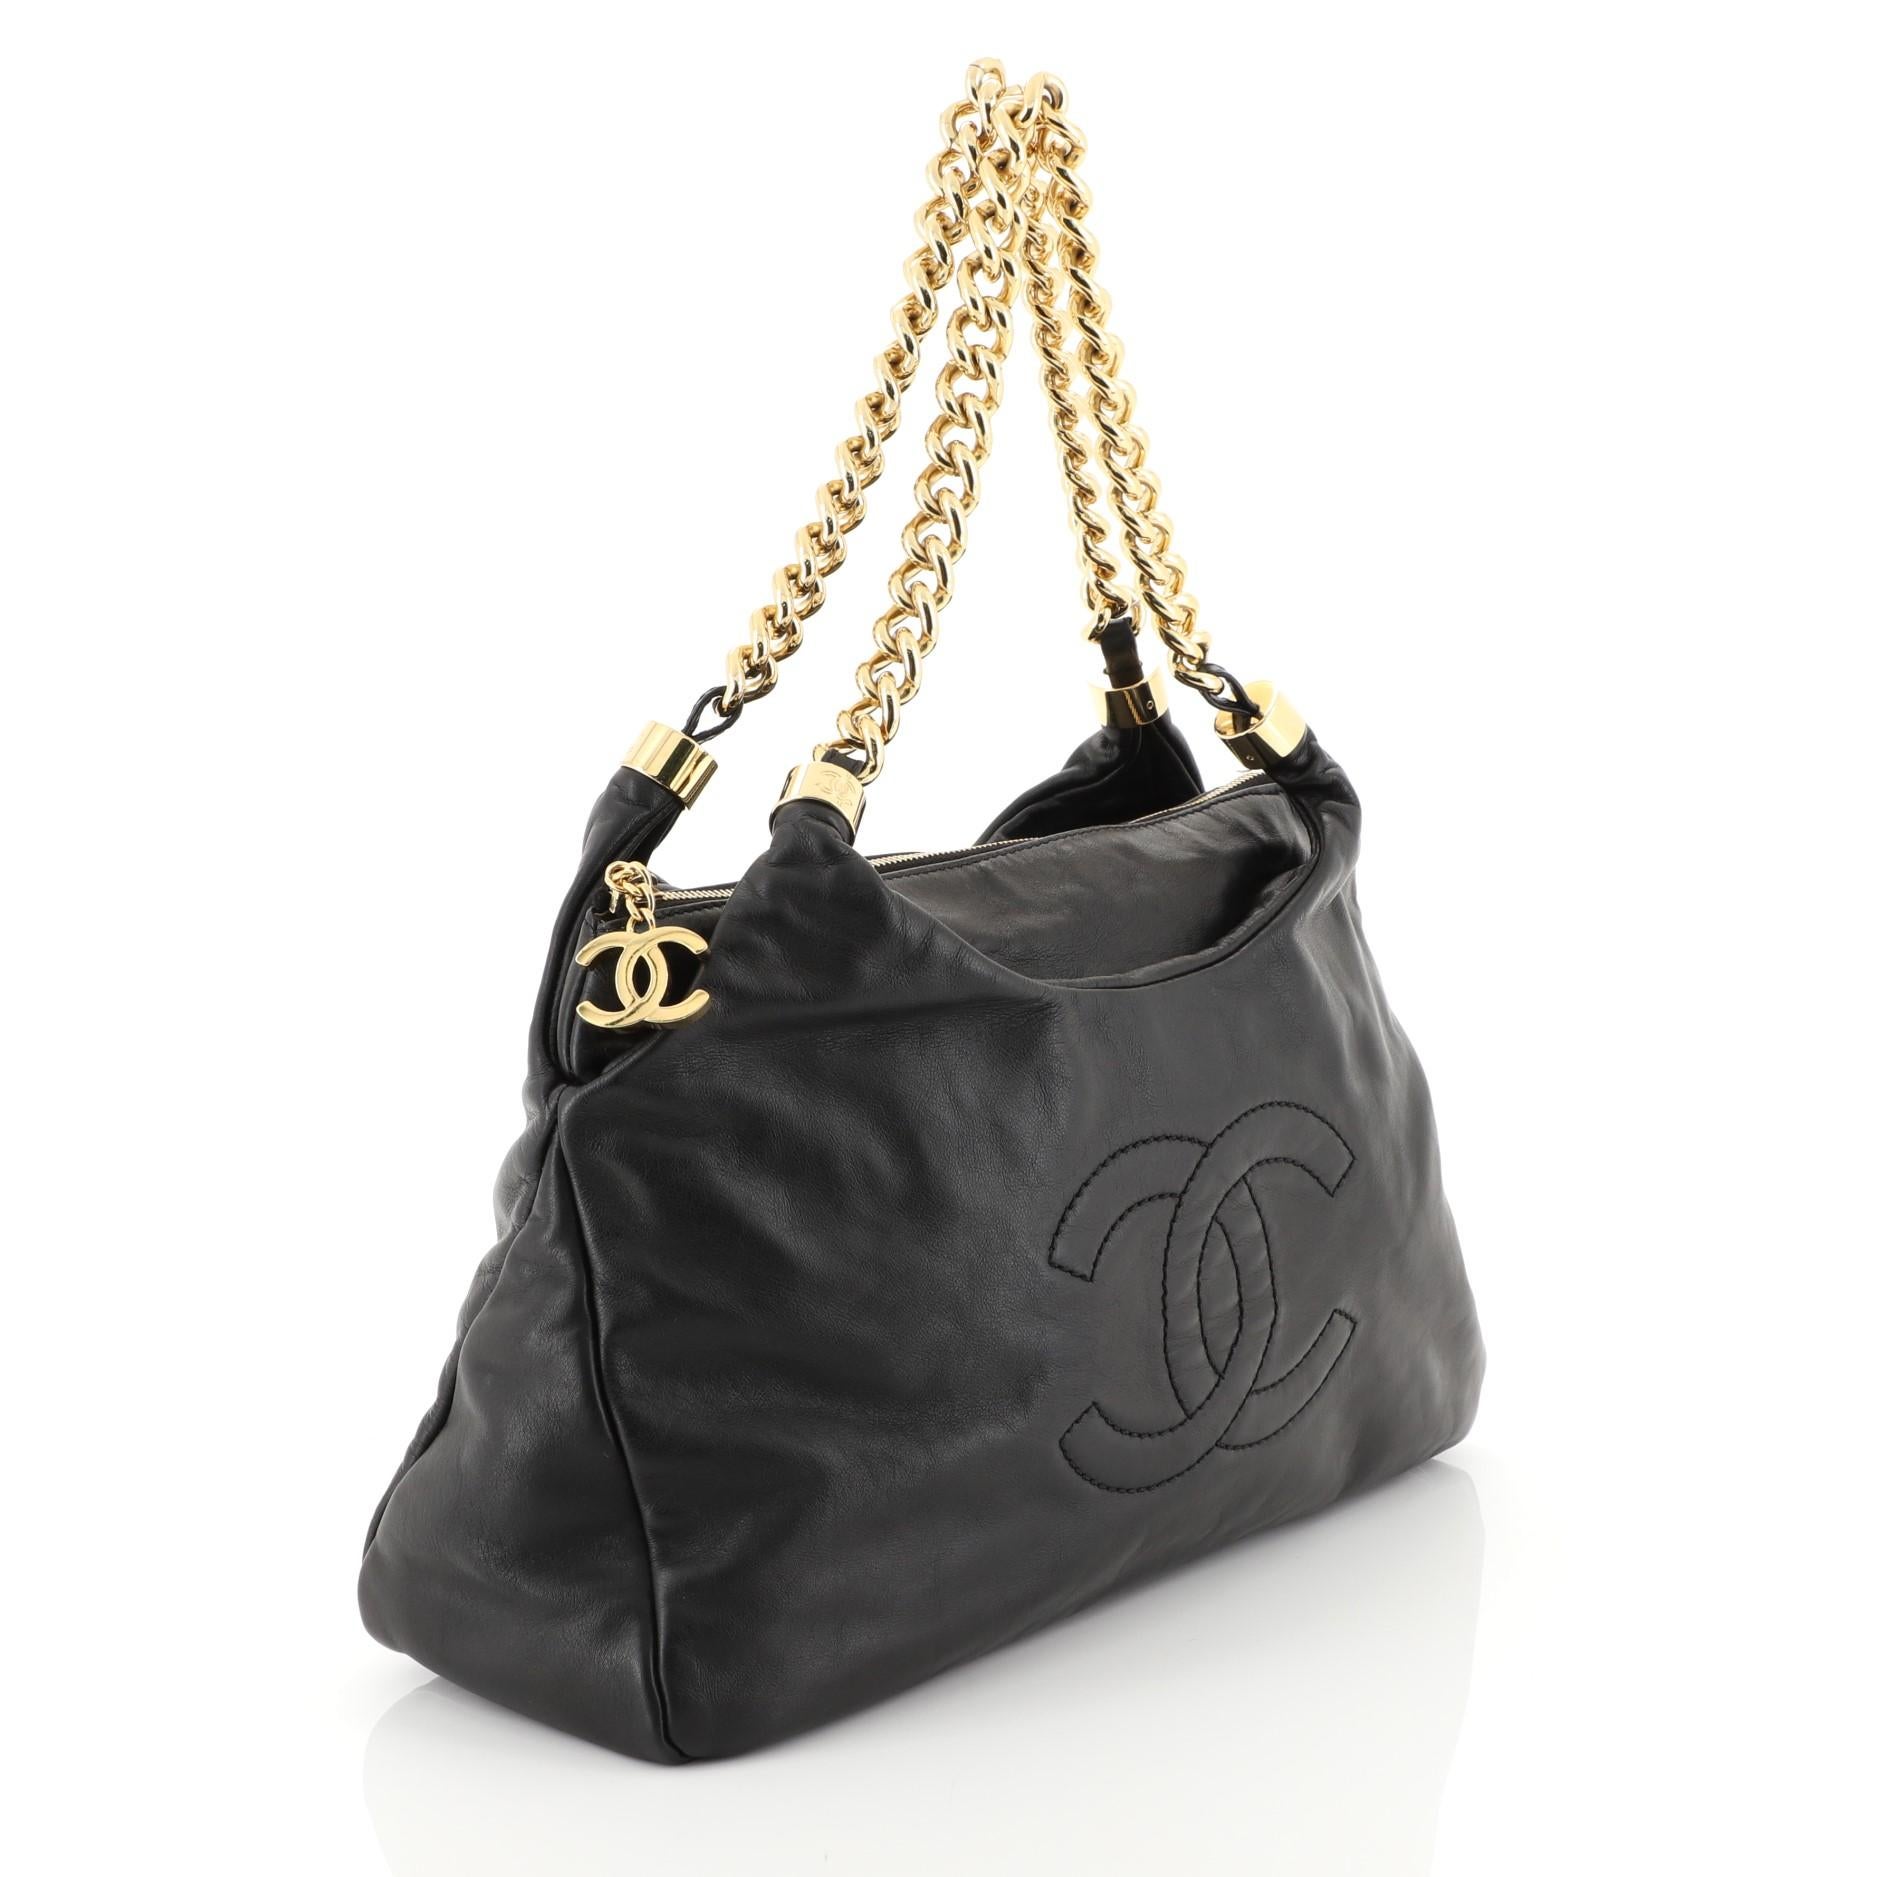 This Chanel Rodeo Drive Zip Hobo Lambskin Small, crafted from black lambskin, features dual chain link straps, interlocking CC stitched logo at front, CC charm zip pull, and gold-tone hardware. Its zip closure opens to a neutral satin interior with